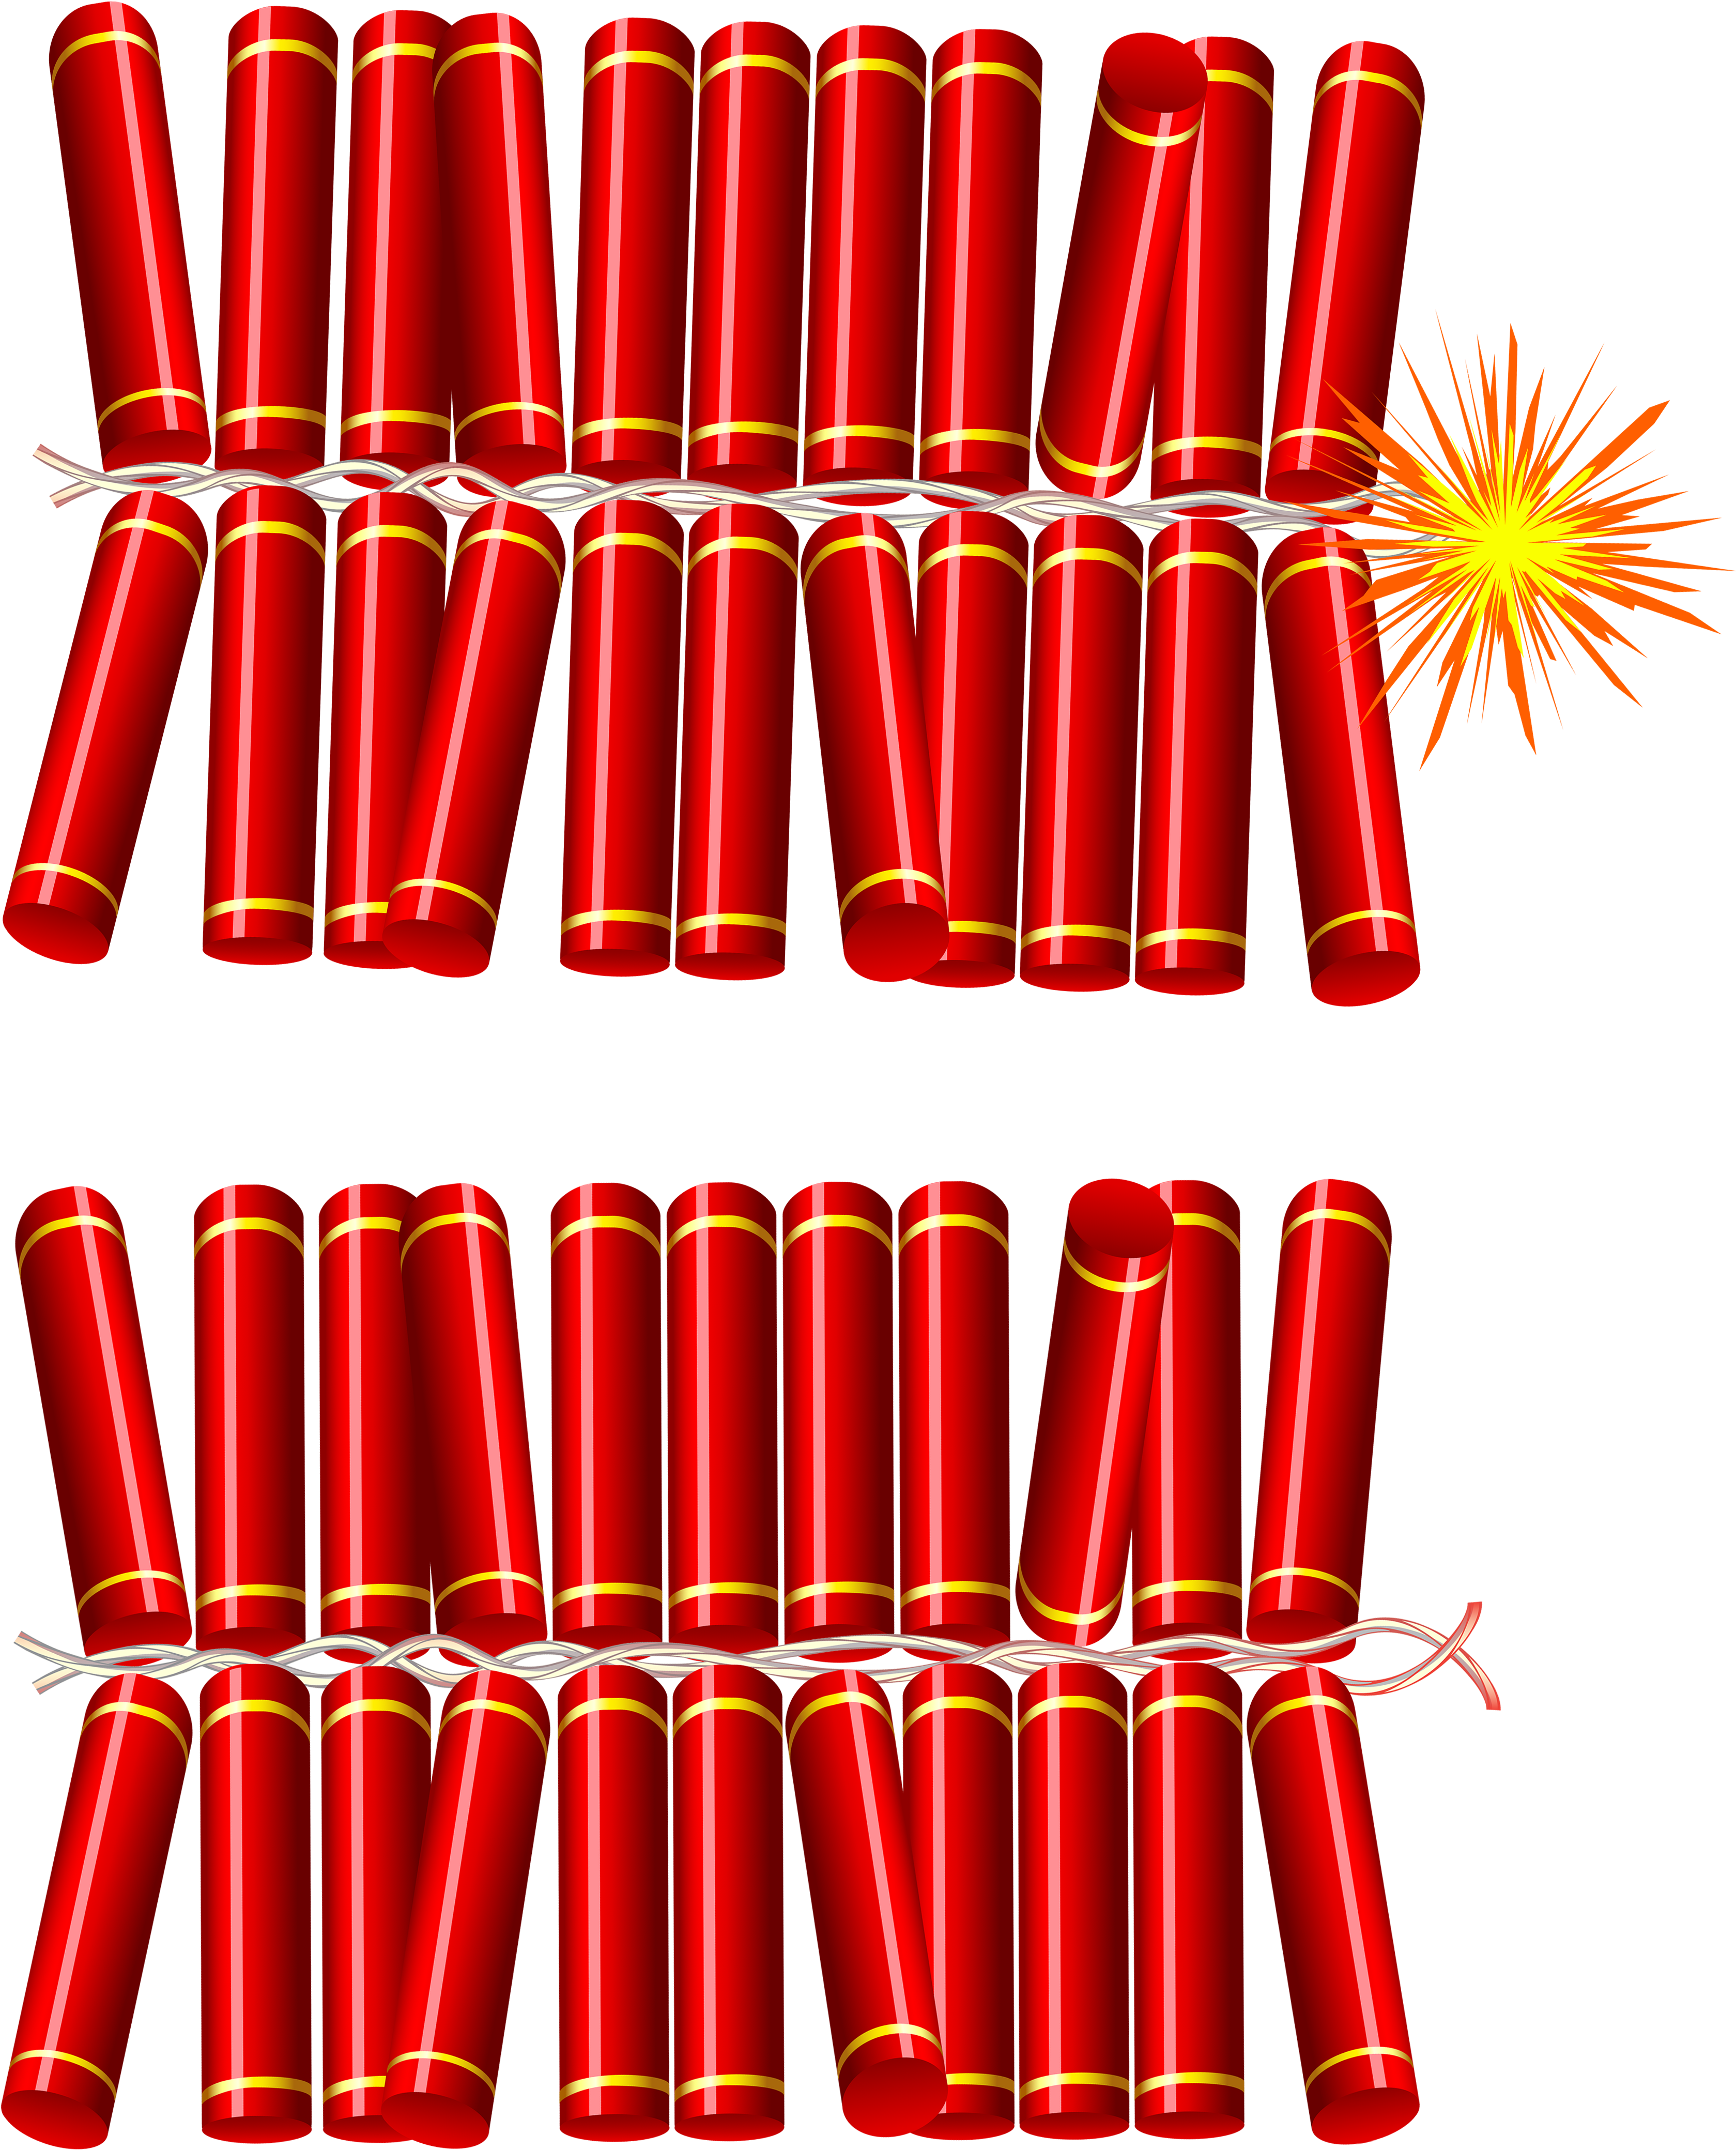 A Red Sticks Tied Together With A Lit Firecracker